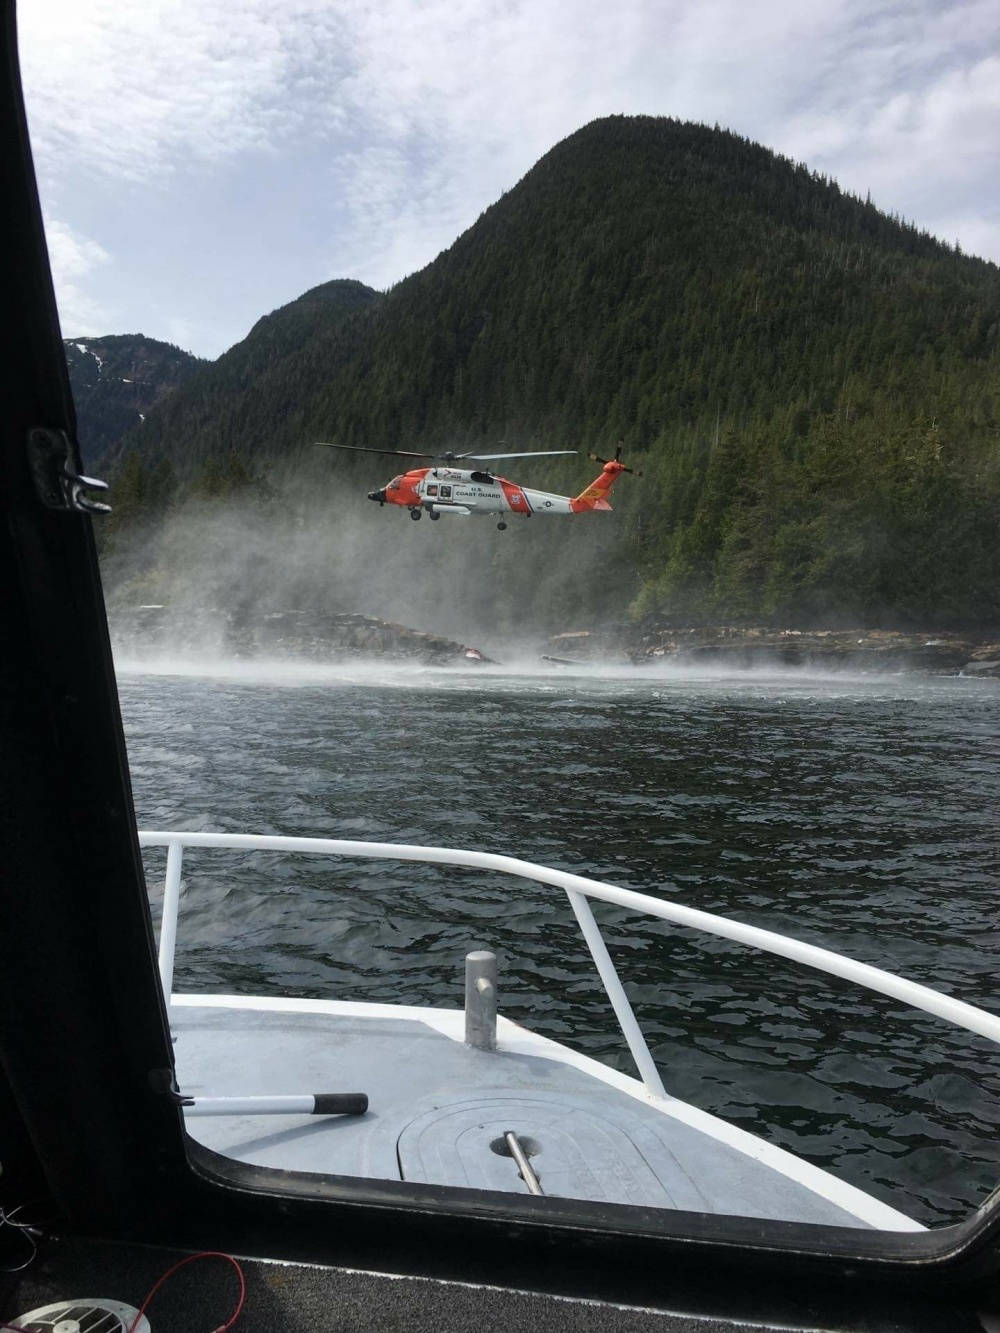 A Coast Guard Air Station Sitka MH-60 Jayhawk helicopter crew hovers while searching for a survivor from a report of two aircraft colliding in the vicinity of George Inlet near Ketchikan, Alaska, May 13, 2019. Ten survivors of the crash had reportedly swam to shore and were rescued by Coast Guard aircrews while the search continues for two people still reported to be missing from the crash. (Courtesy photo | Ryan Sinkey)